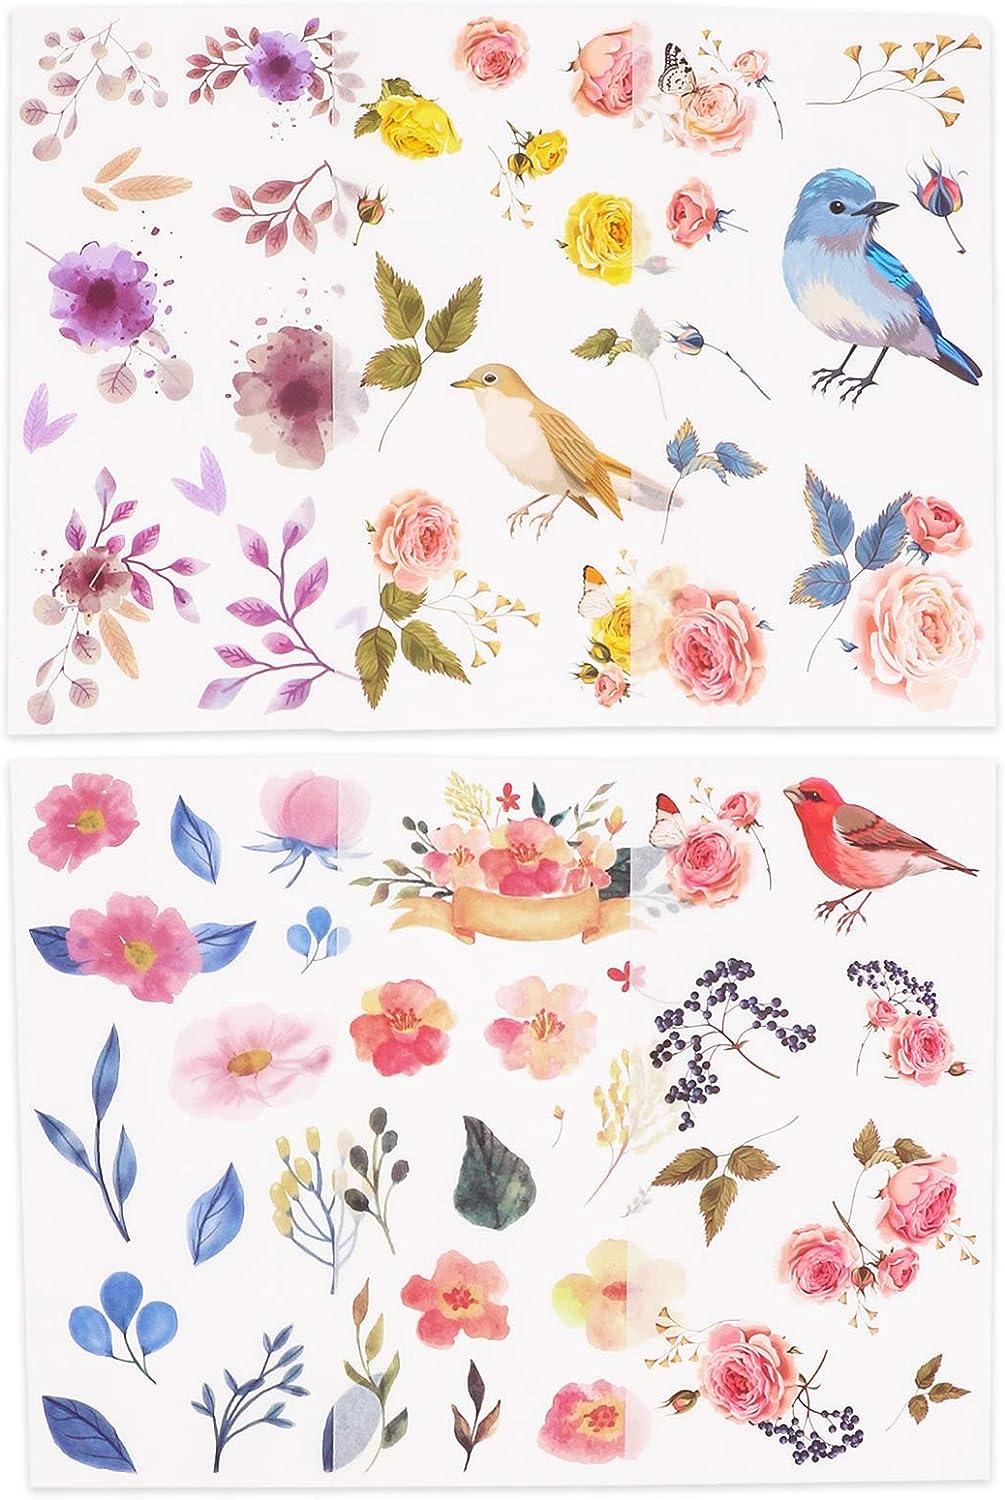 Knaid Pressed Flower Themed Stickers Set (320 Pieces) Dried